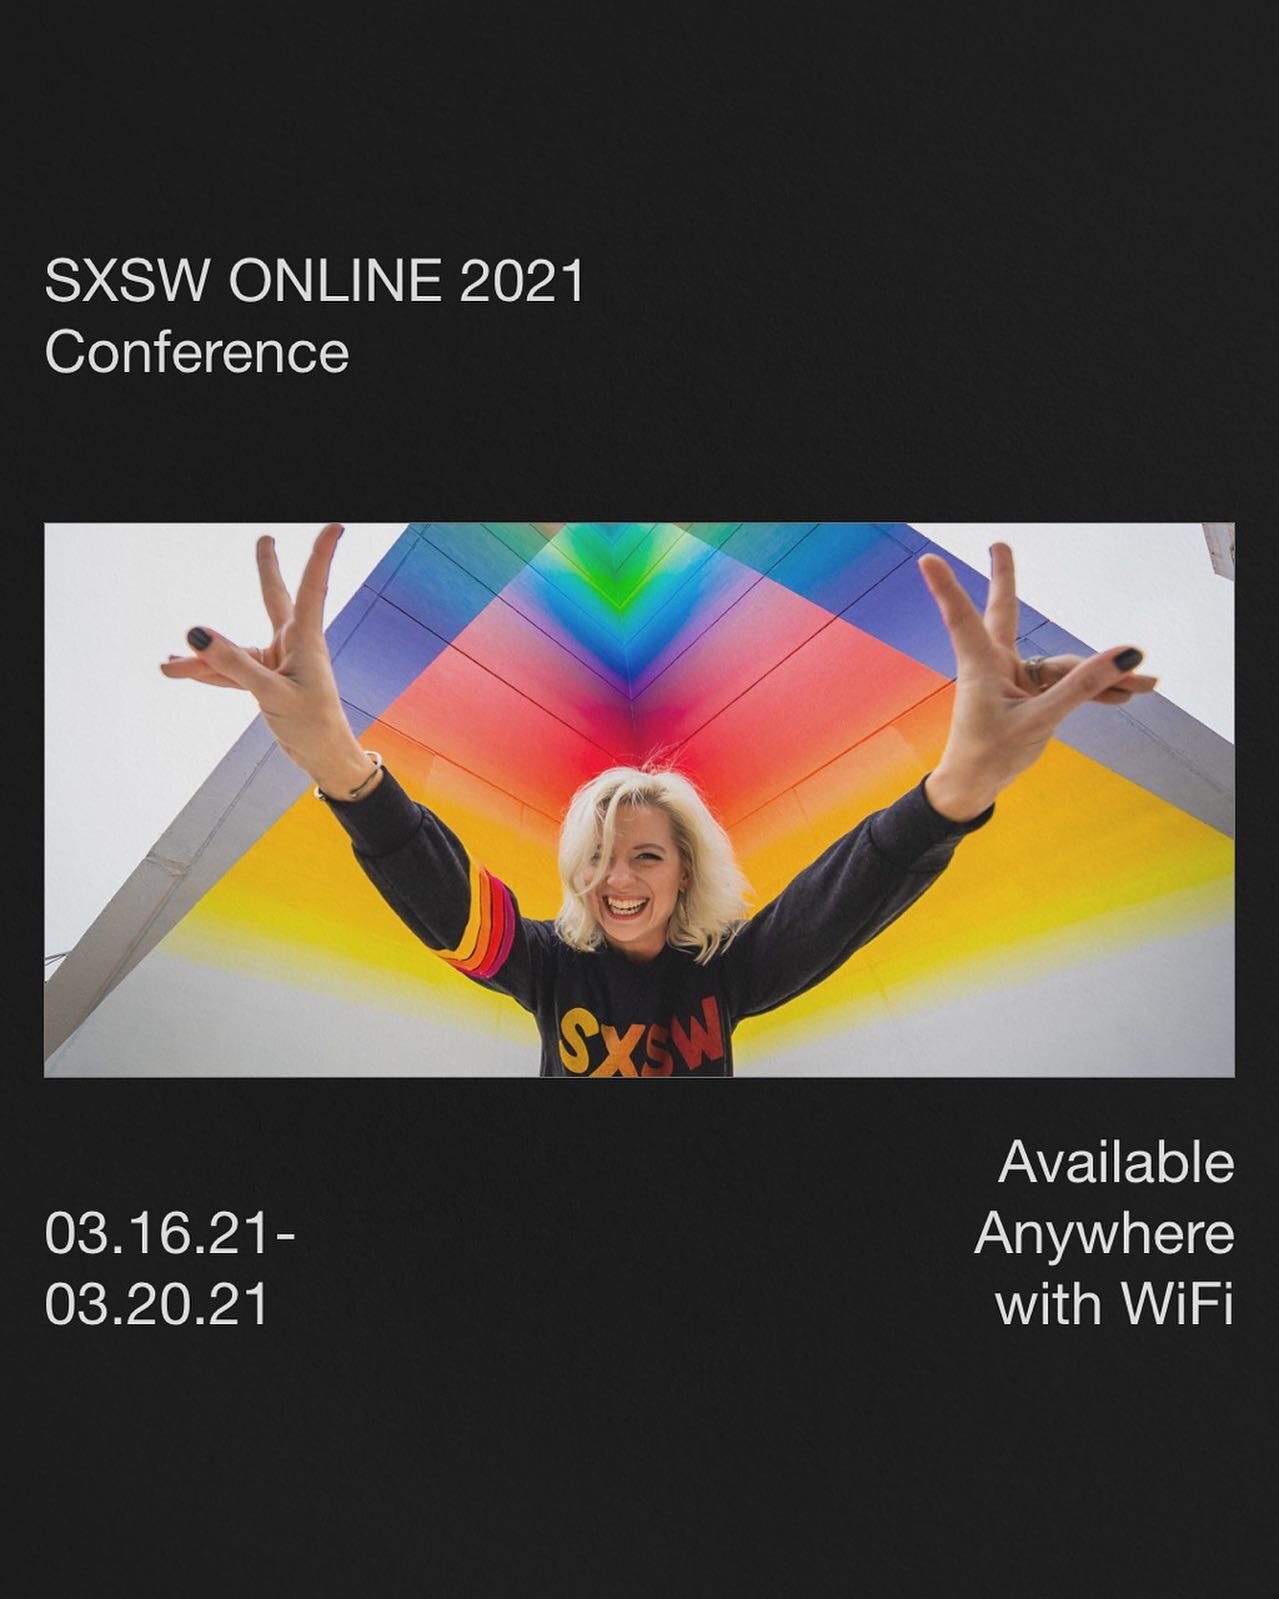 SXSW ONLINE 2021 hosted by @SXSW will be open from: 03.16.2021-03.20.2021
...
Online: Yes
Free: No
...
SXSW is going digital this year, with online experiences including keynotes, Conference sessions, Music Festival showcases, Film Festival screening